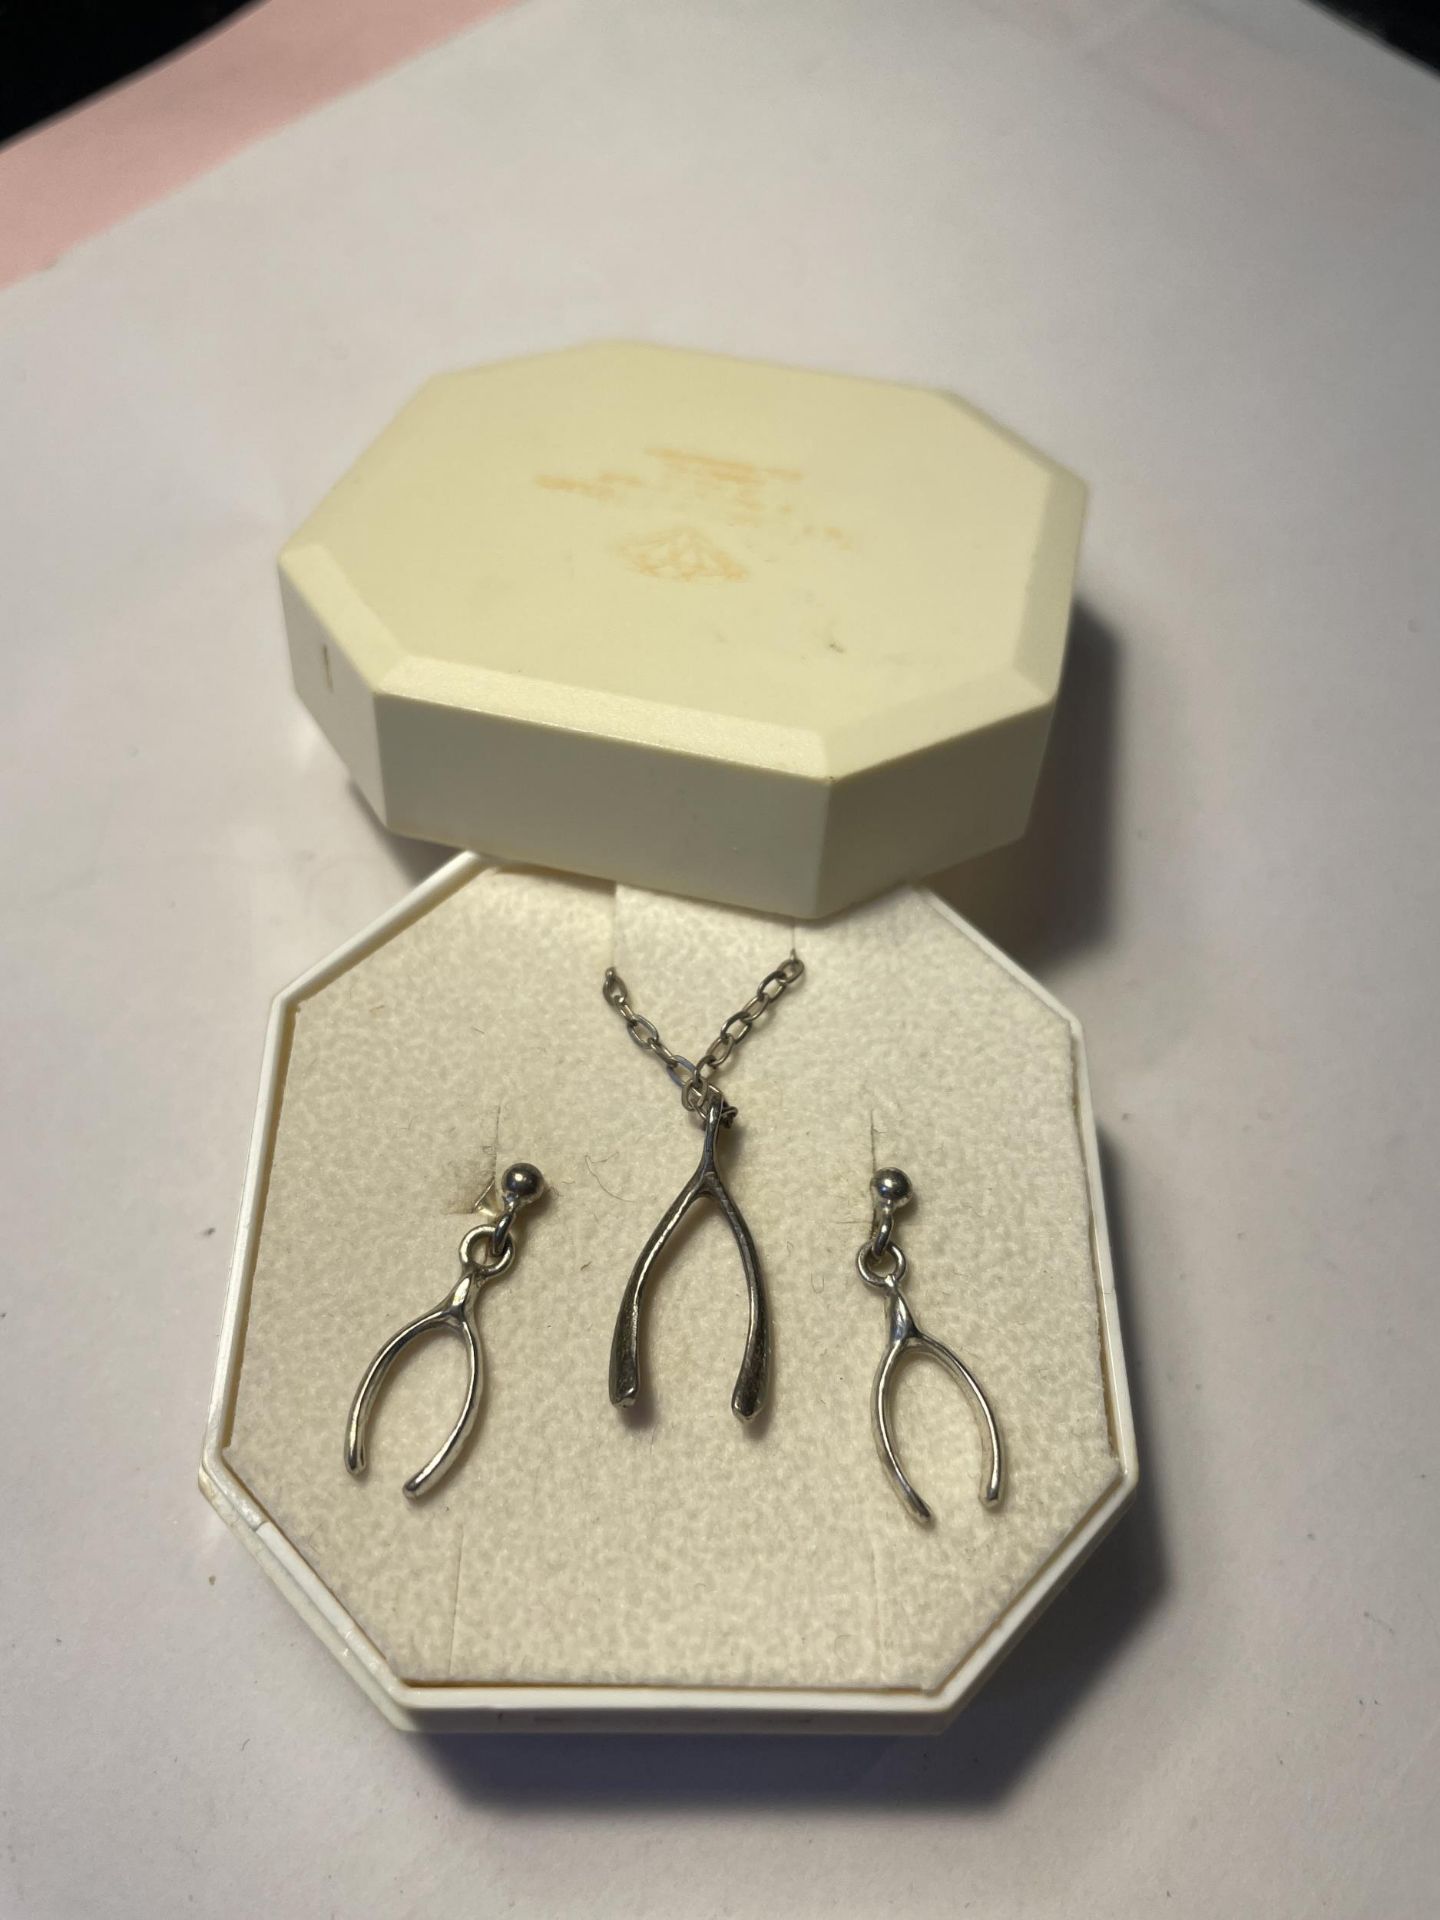 A SILVER WISHBONE NECKLACE AND EARRINGS SET IN A PRESENTATION BOX